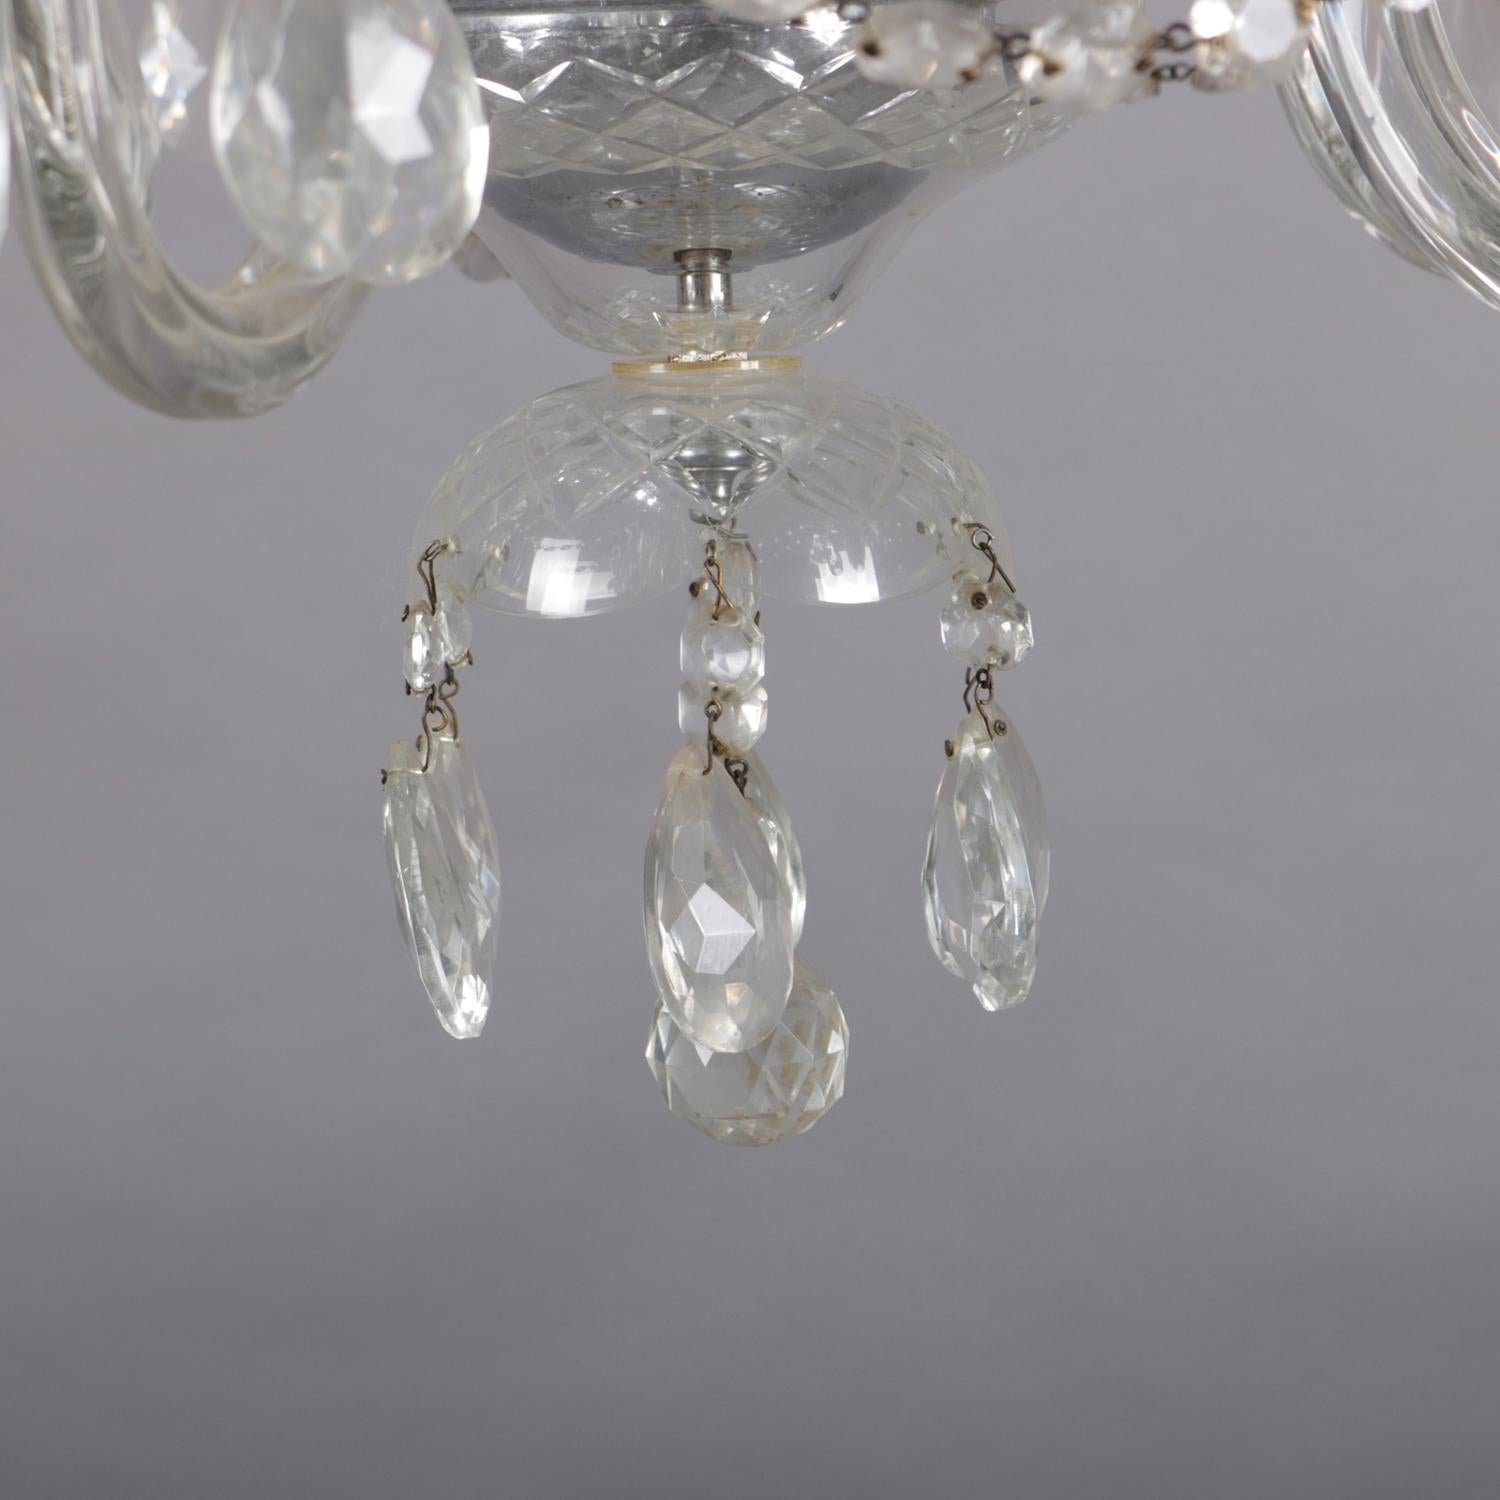 20th Century Vintage French Crystal and Chrome 5-Light Chandelier with Cut Glass Shades